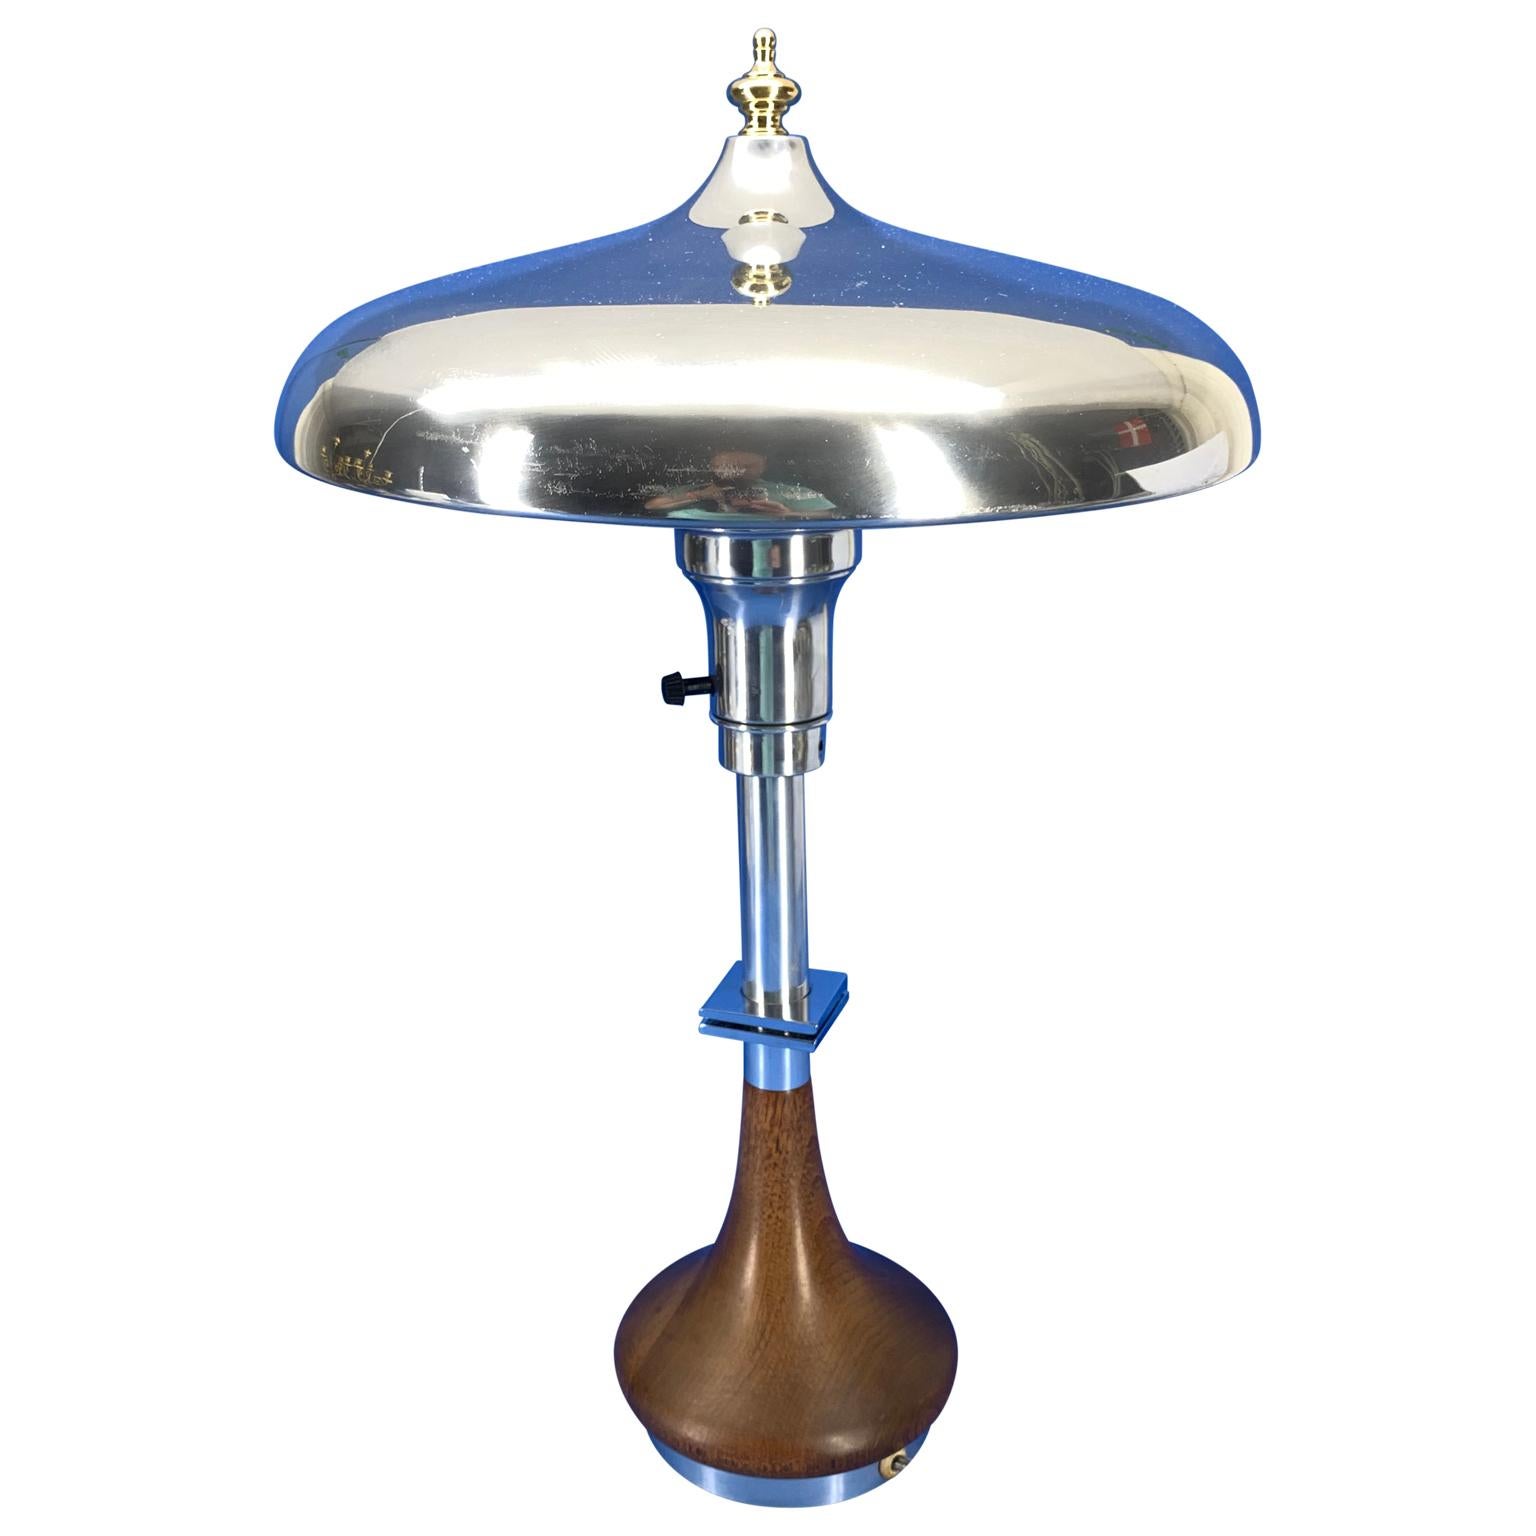 20th Century Scandinavian Art Deco Table Lamp With Chrome Shade And Solid Brass Finial